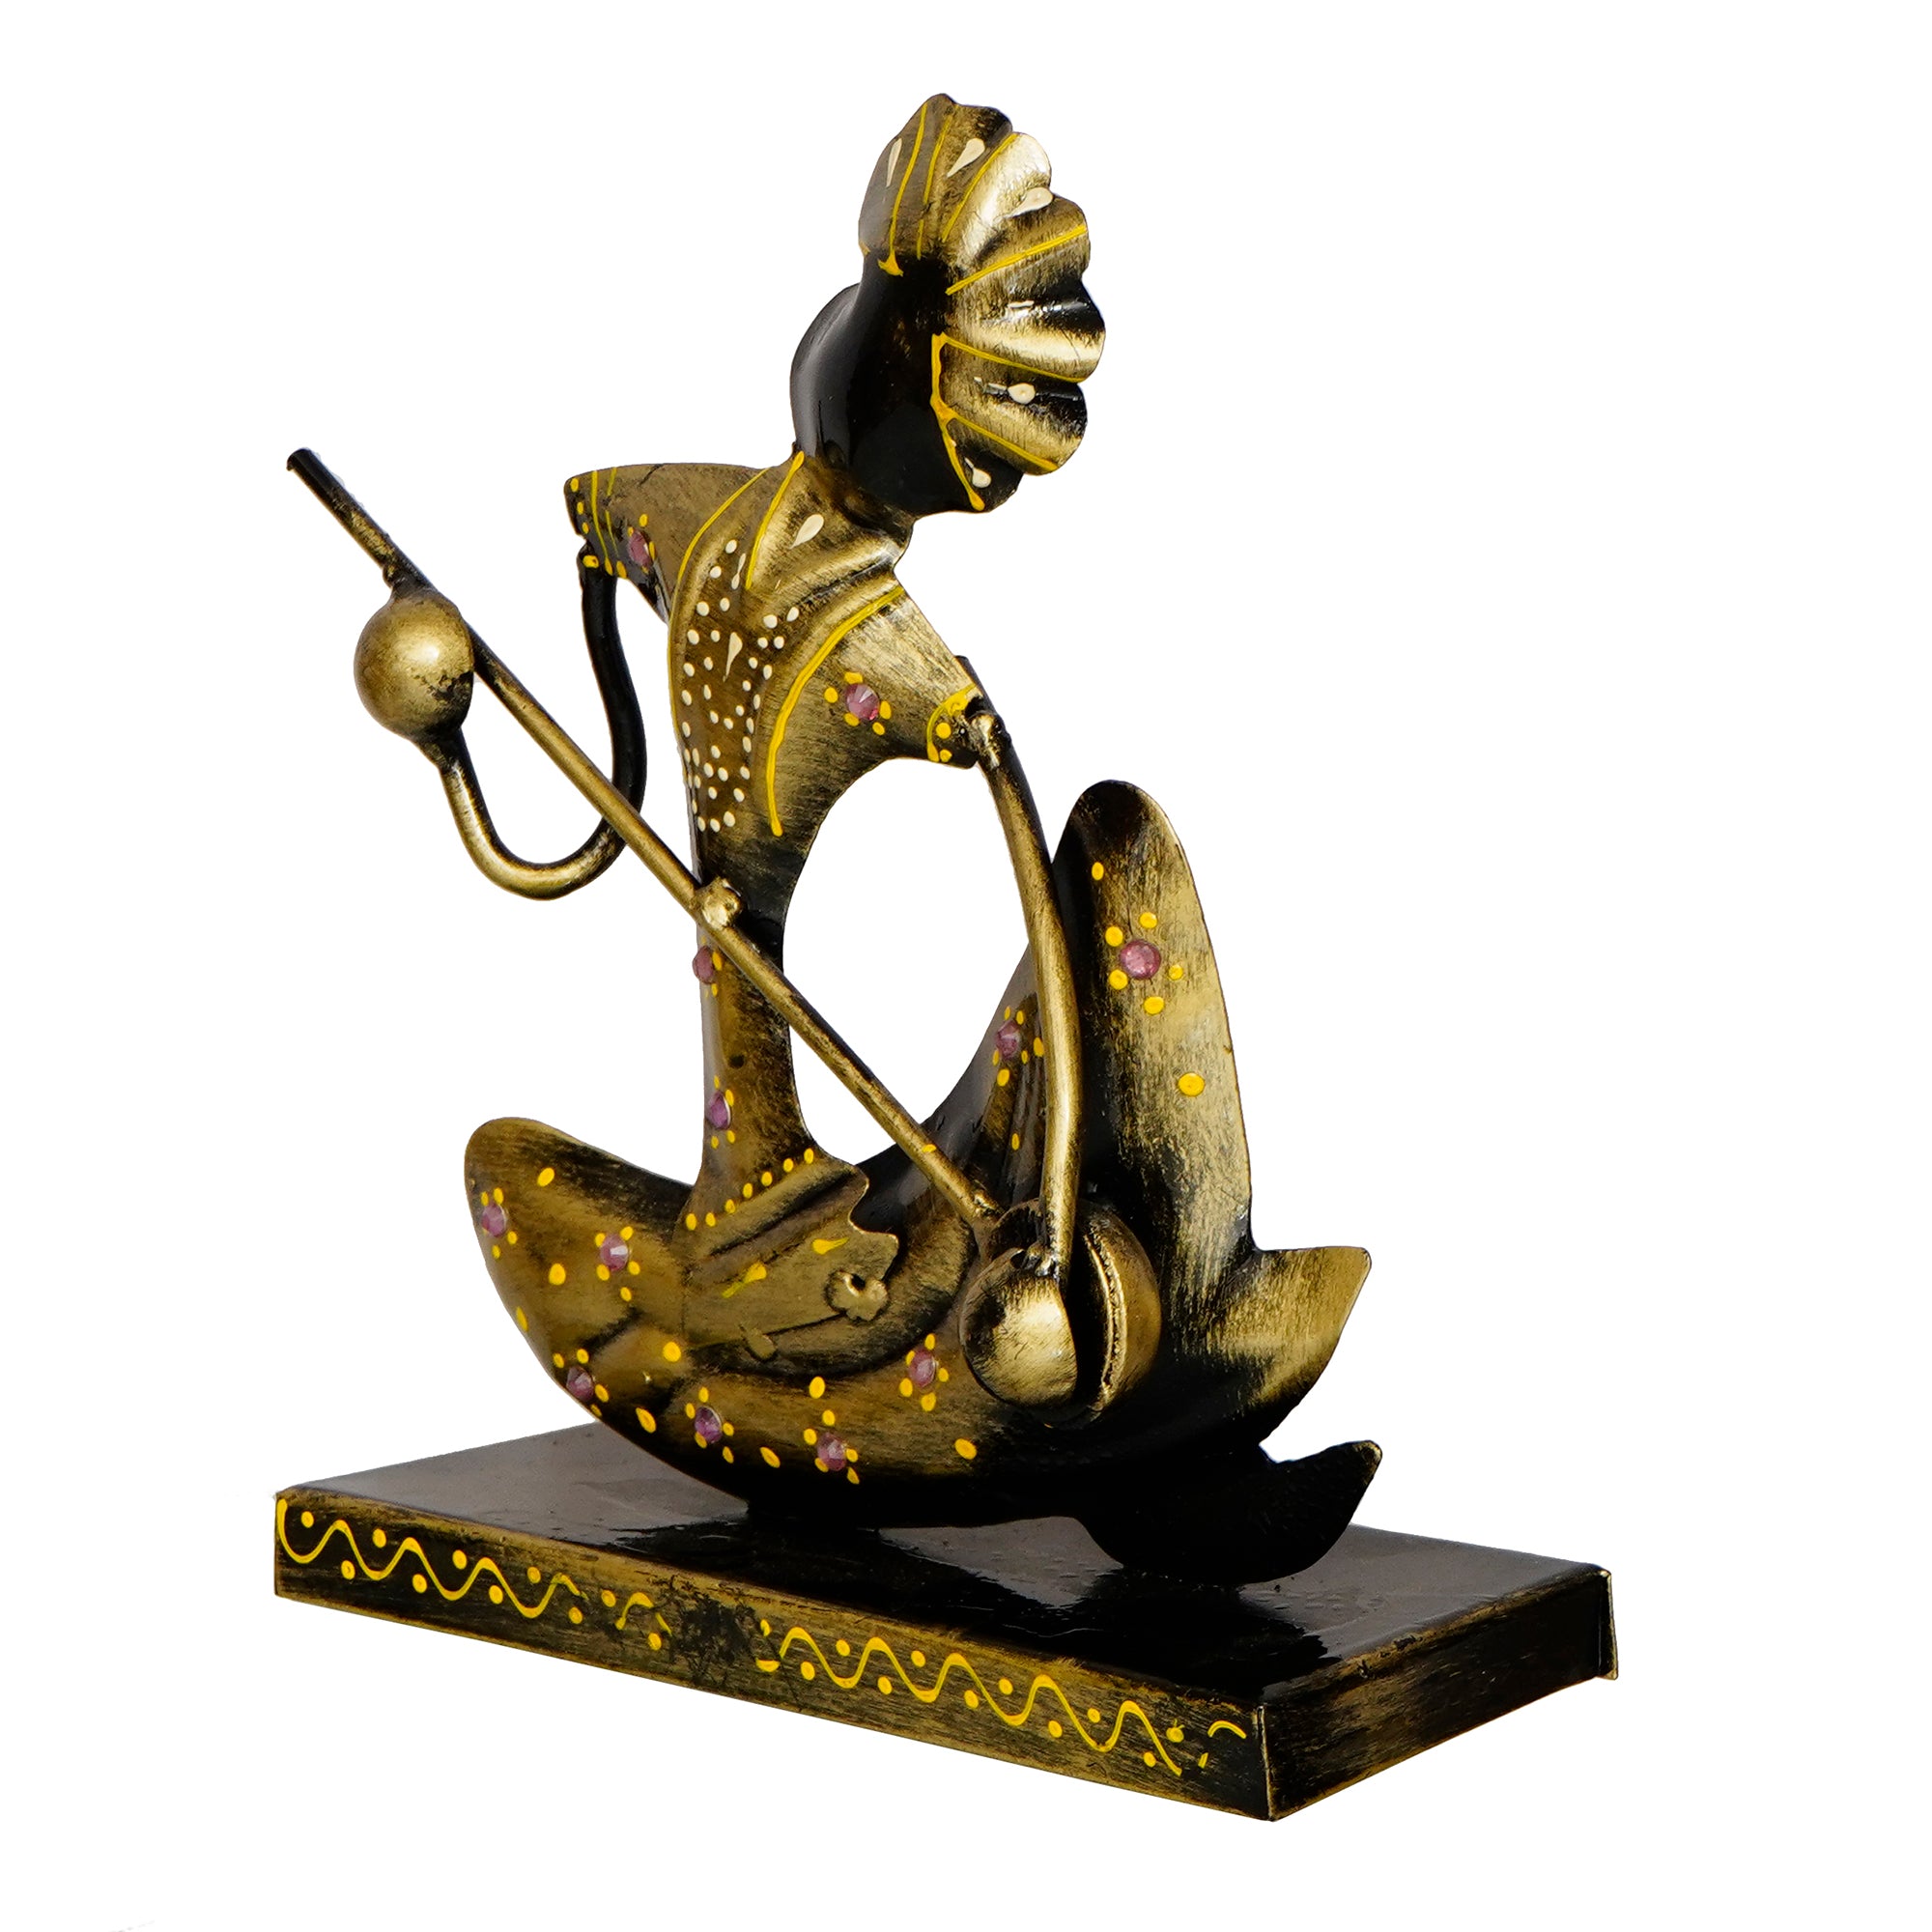 Iron Tribal Man Figurine with Paghdi Playing Banjo Musical Instrument Decorative Showpiece (Golden and Black) 5